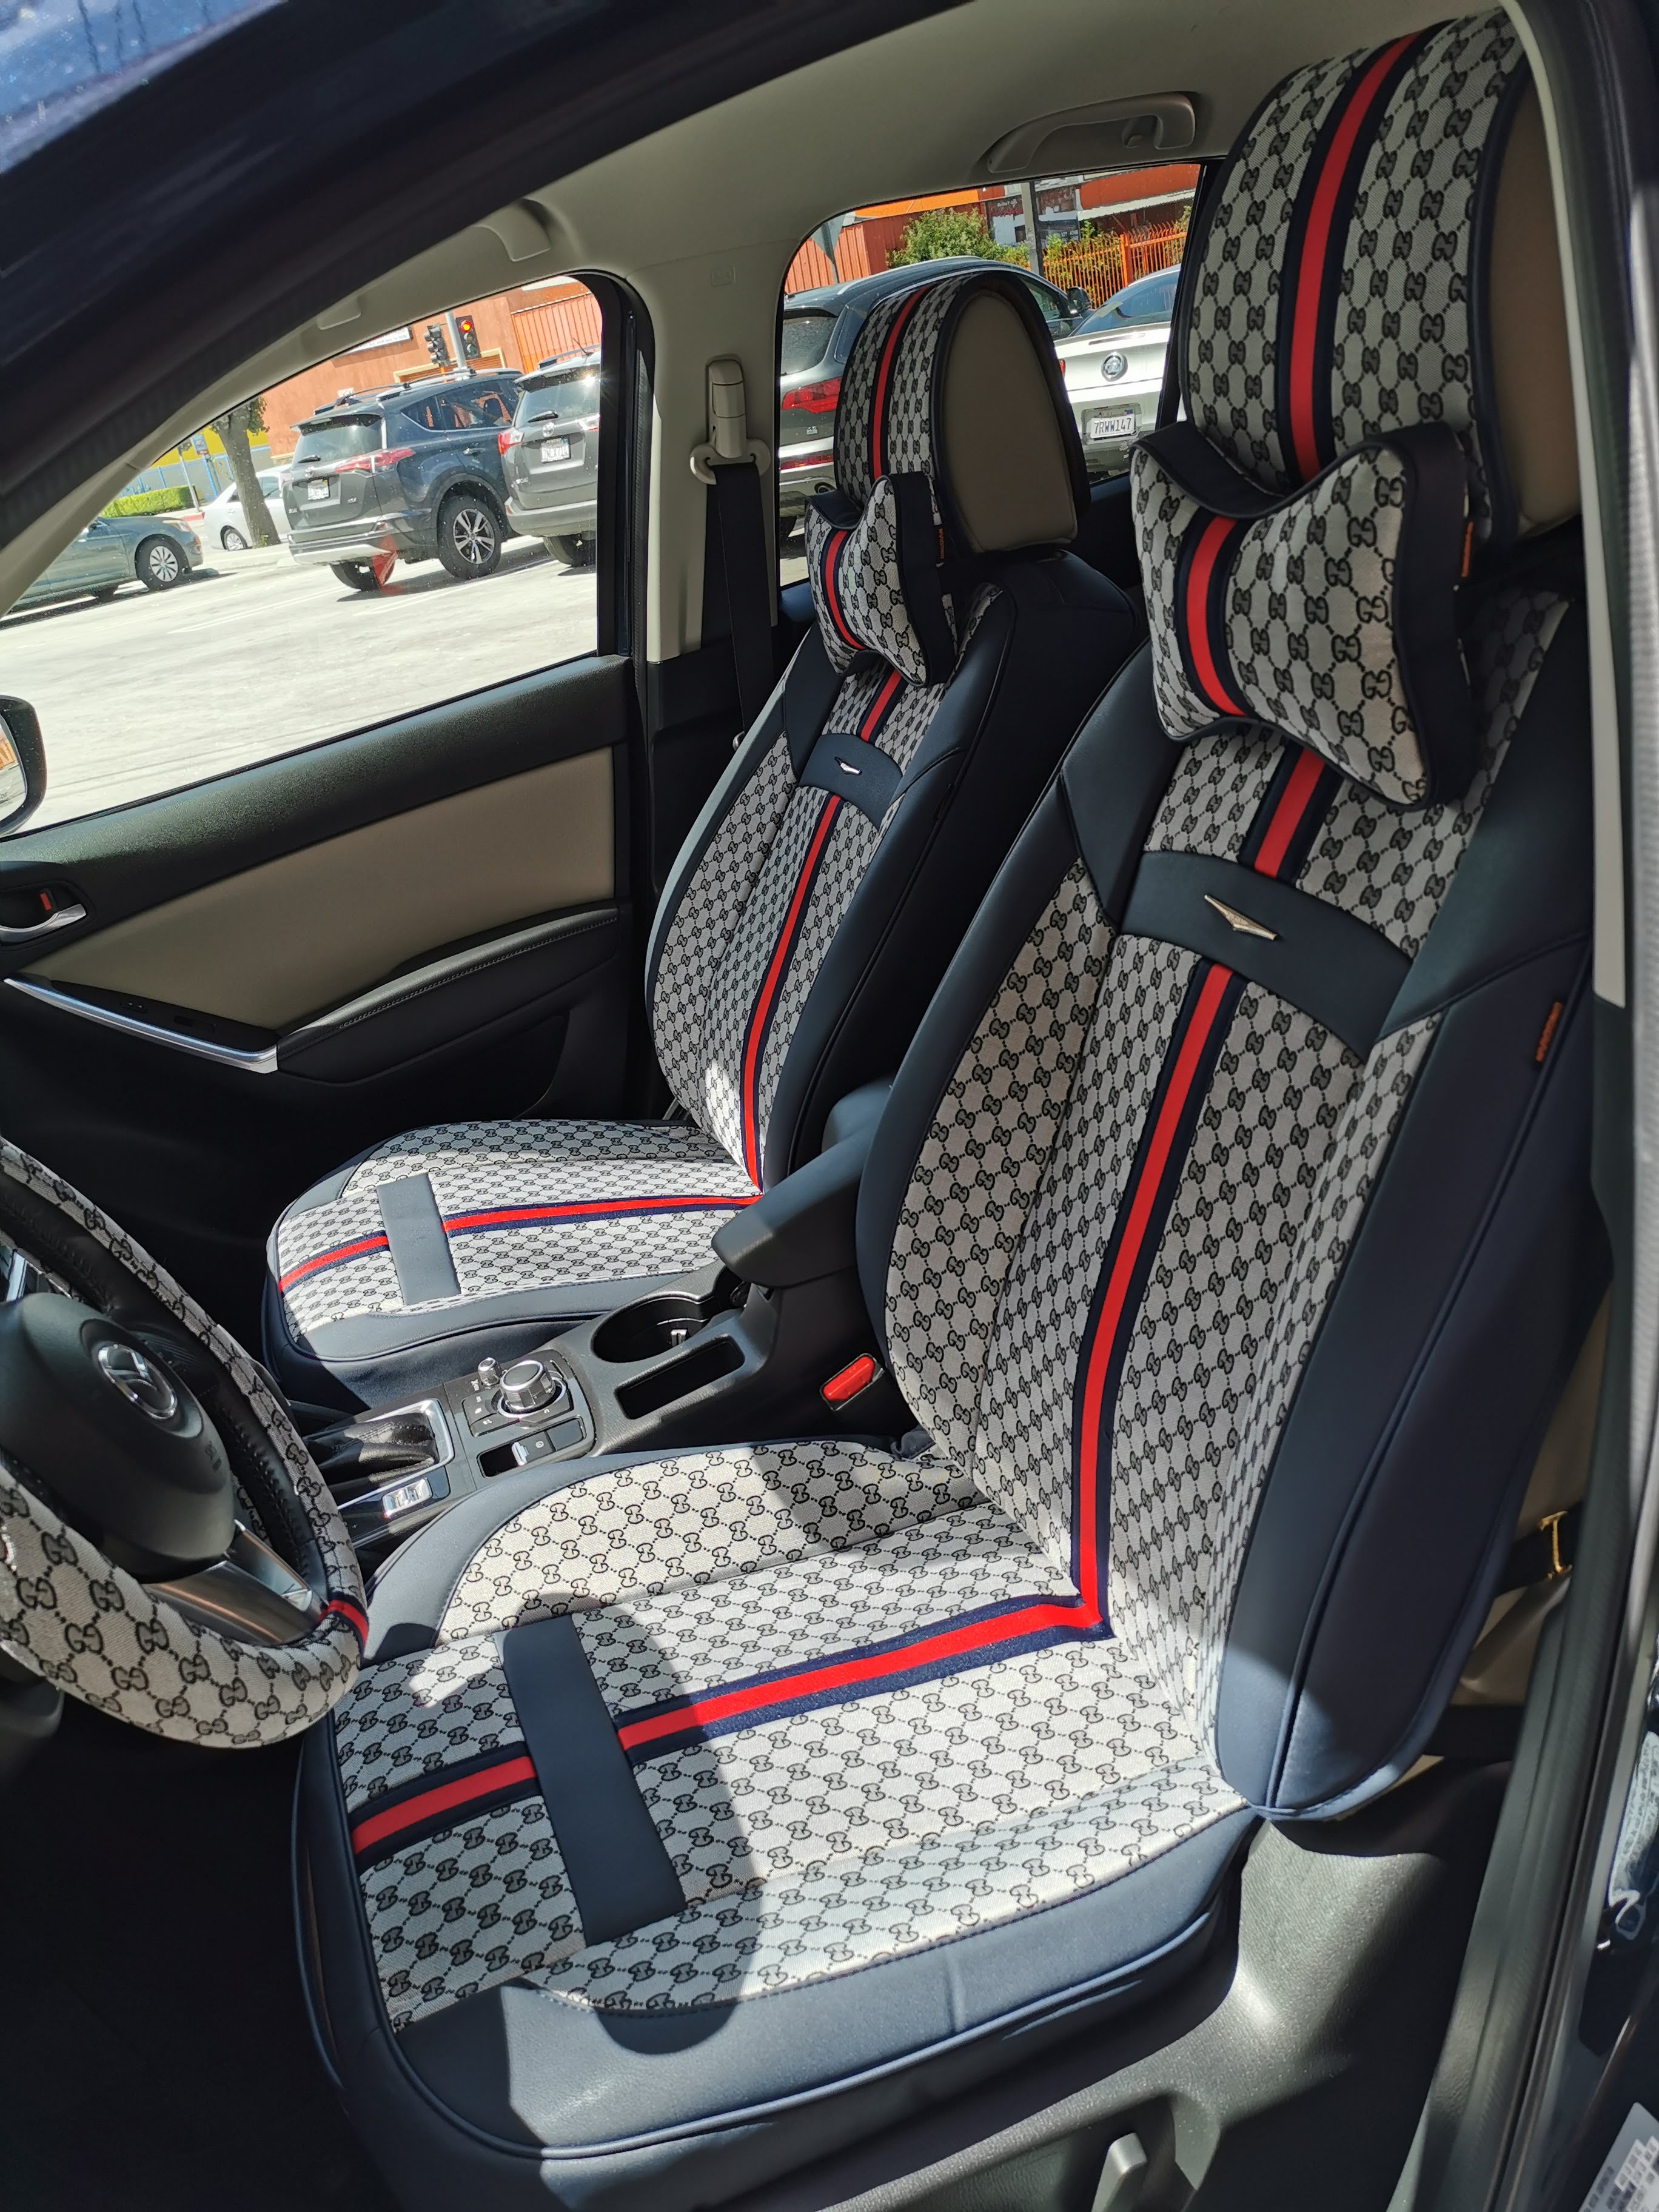 Mazda 6 Seat Cover Installed – Car Seat Cover and Custom Car Floor Mat